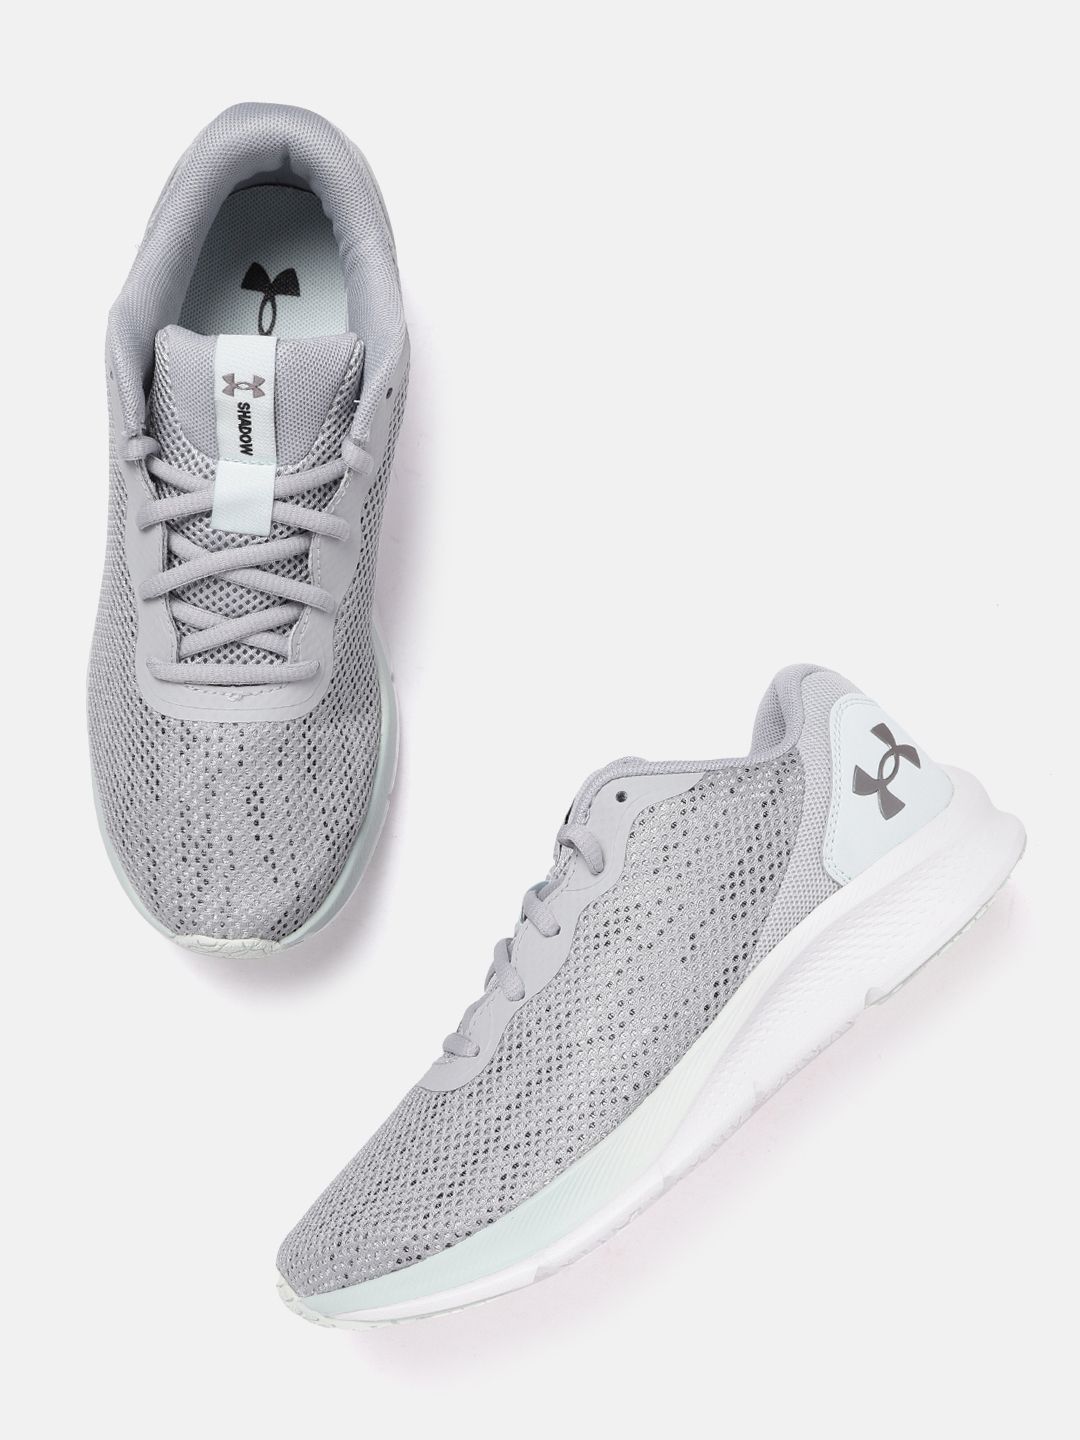 UNDER ARMOUR Women Grey Woven Design Shadow Running Shoes Price in India